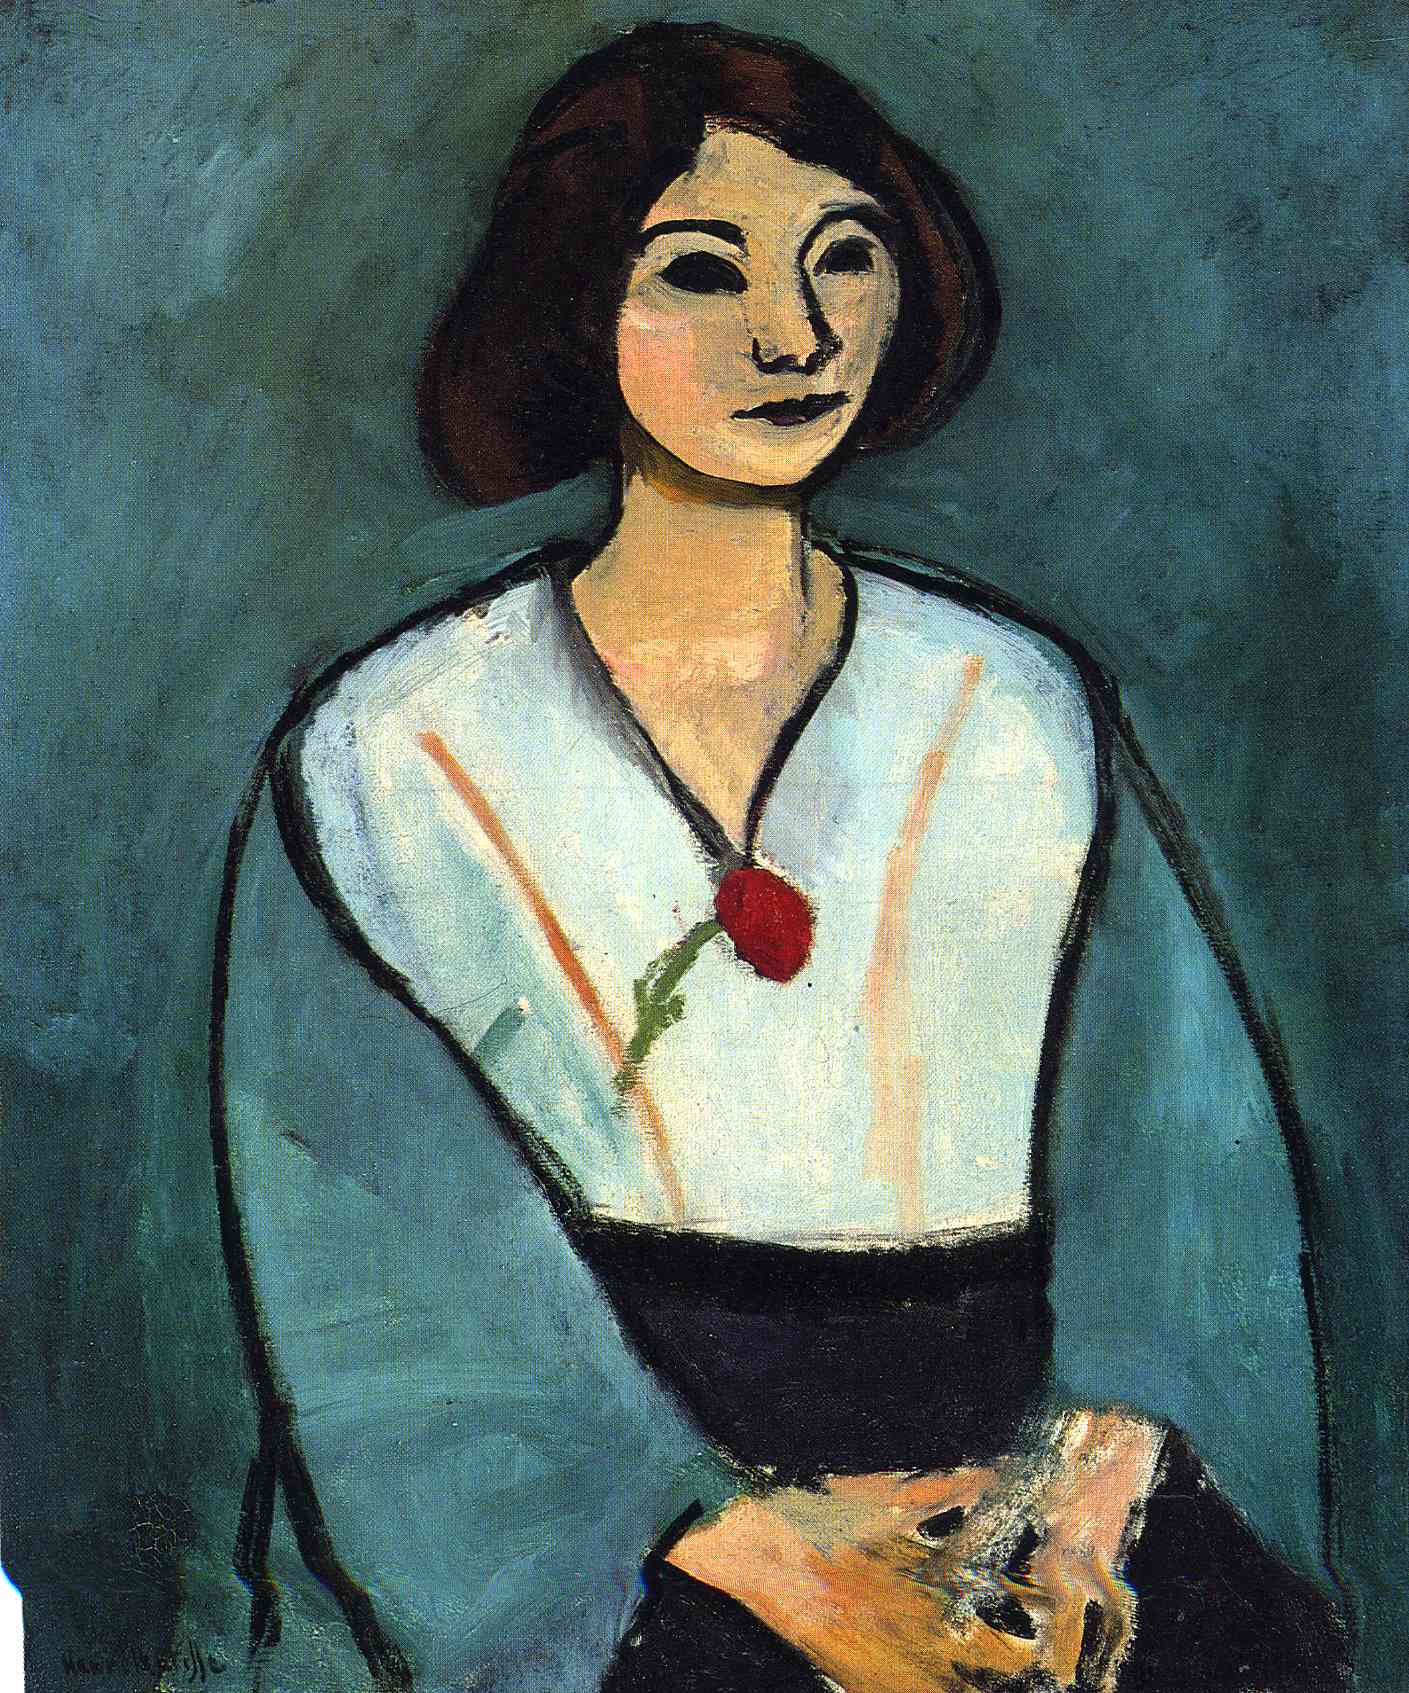 Woman in Green with a Carnation (1909).